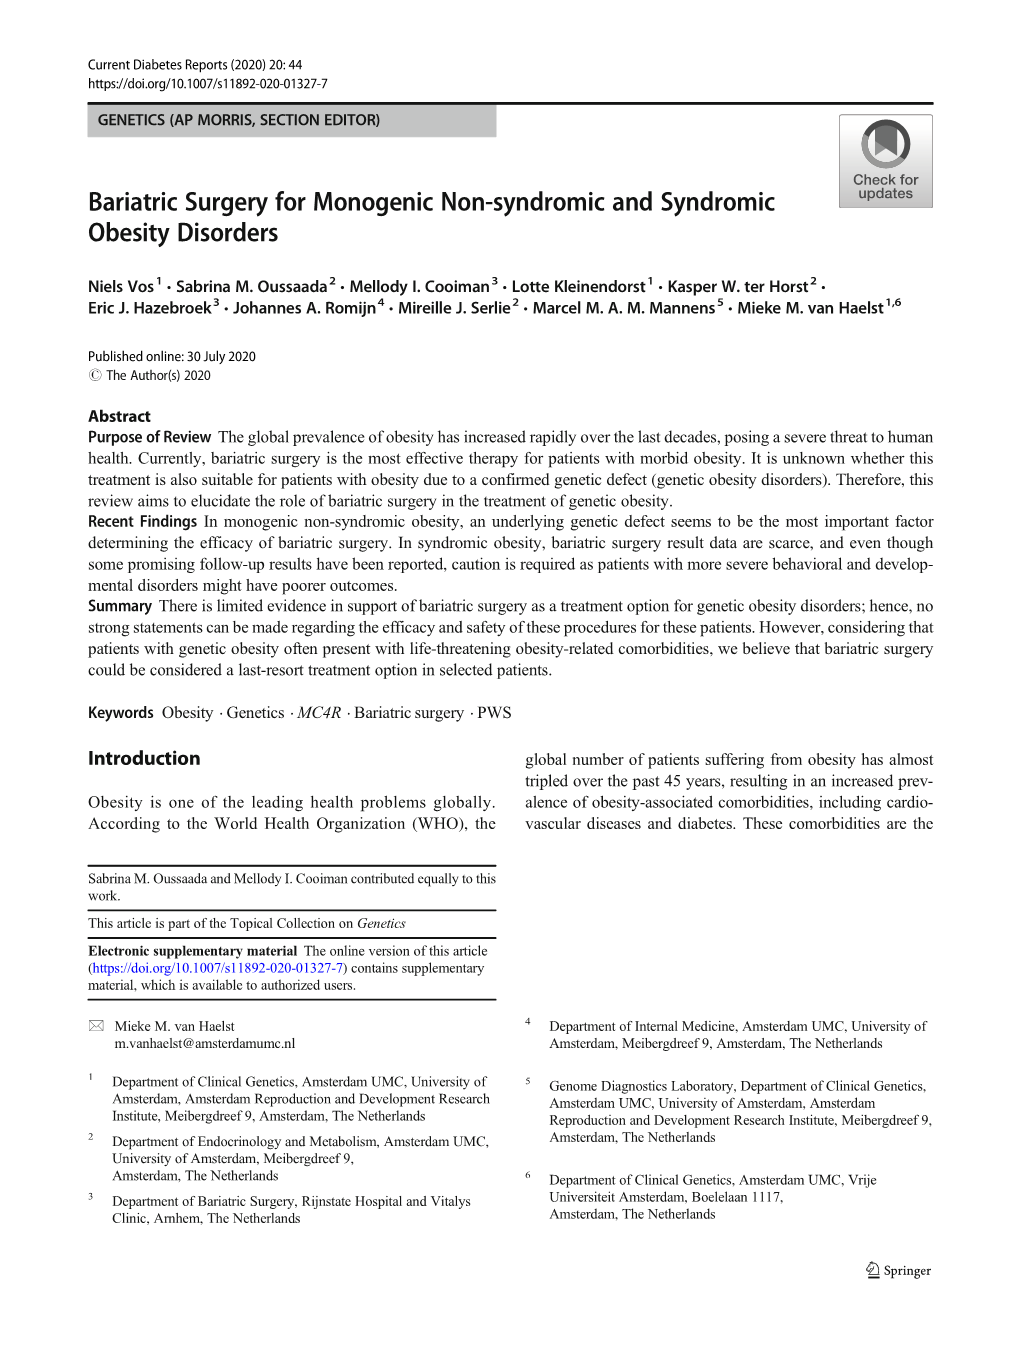 Bariatric Surgery for Monogenic Non-Syndromic and Syndromic Obesity Disorders